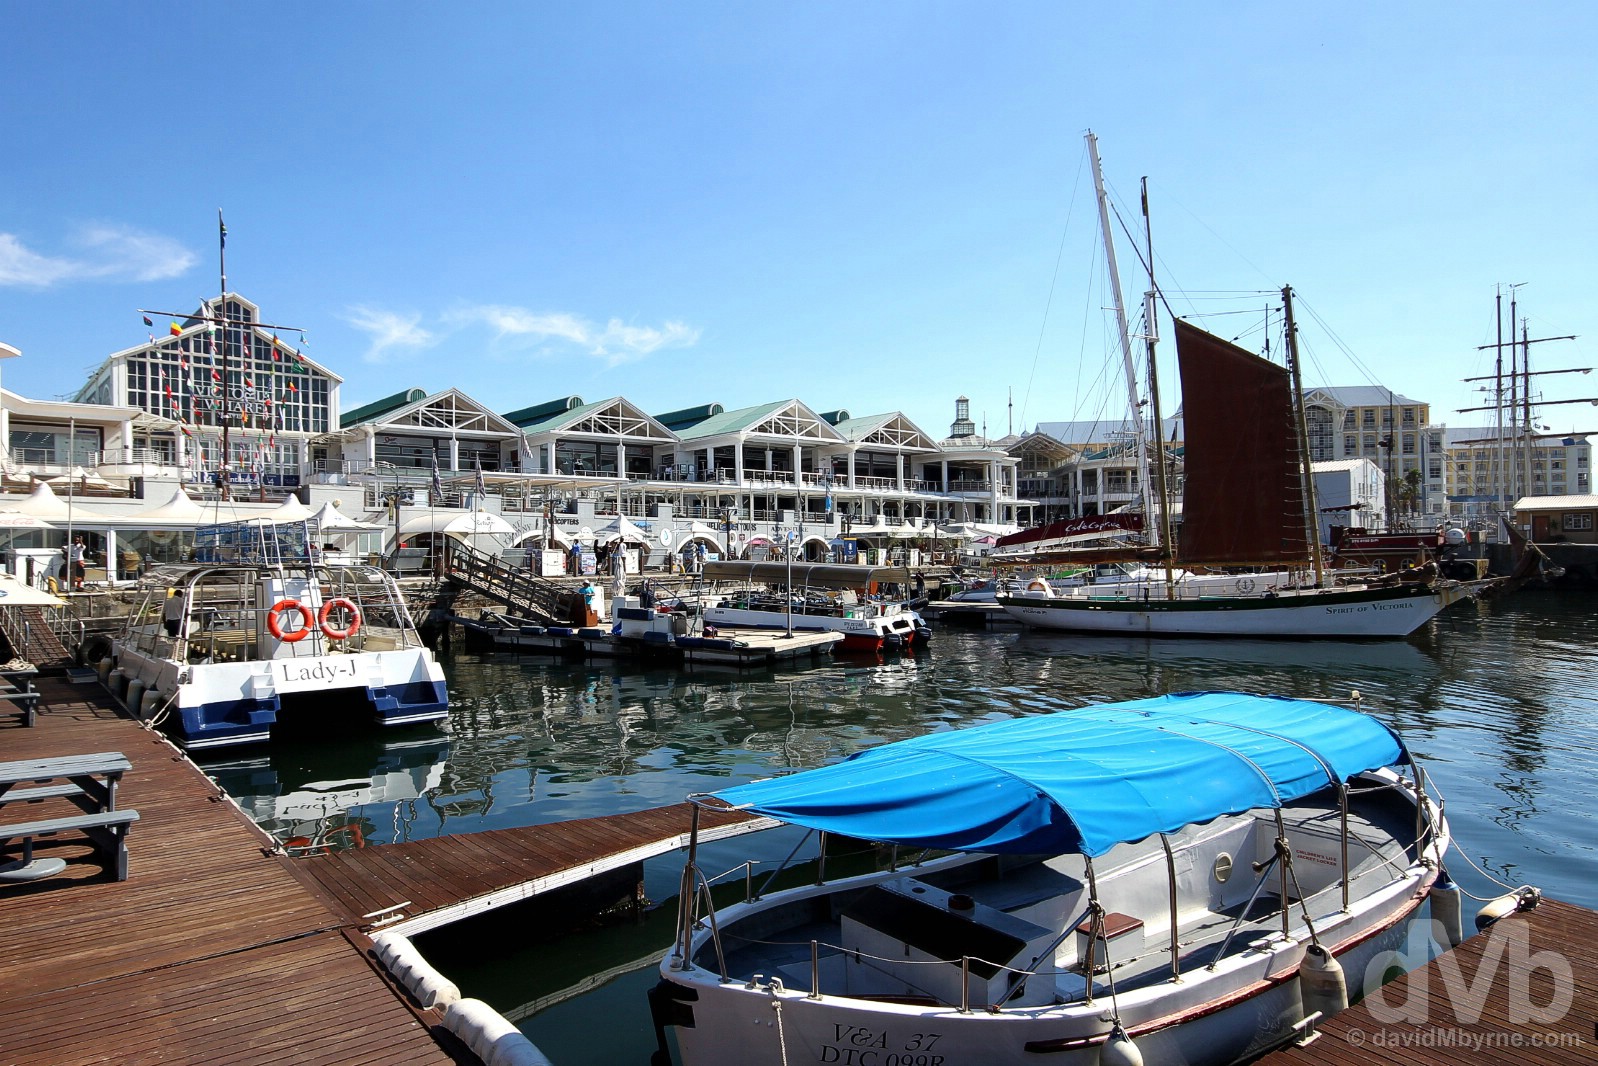 The V&A Waterfront, Cape Town, Western Cape, South Africa. February 22, 2017.